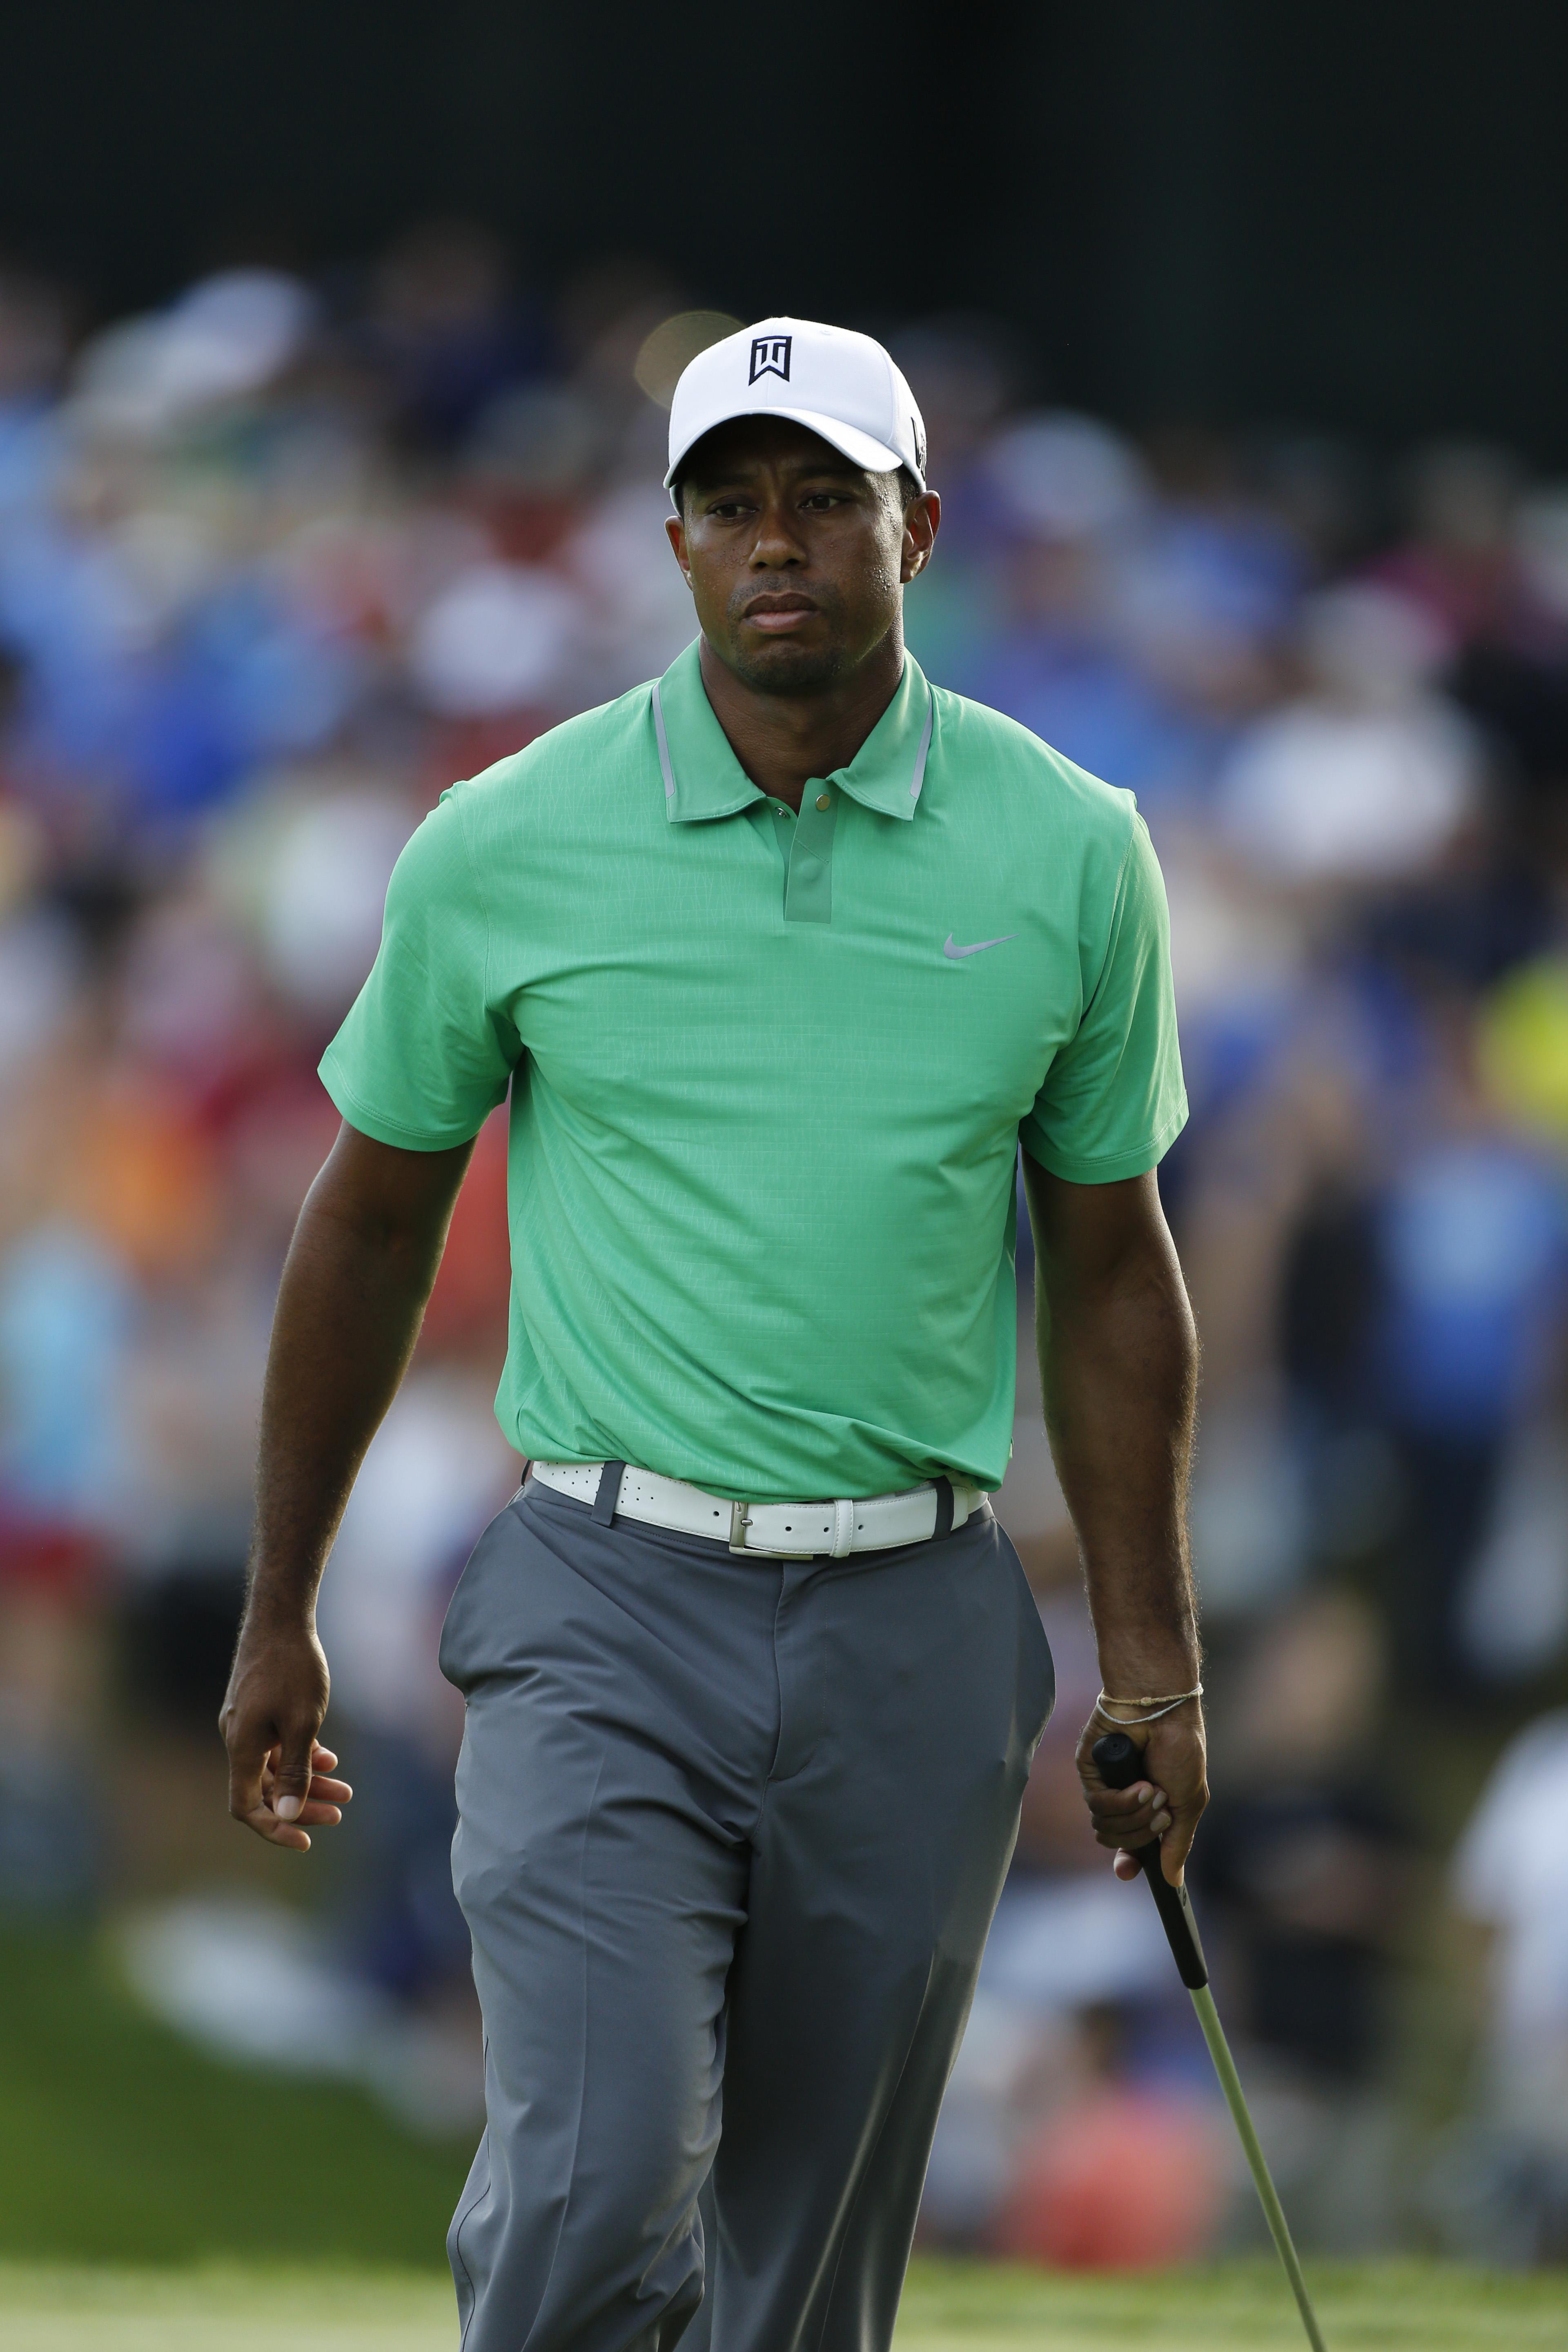 Quotes from the PGA Championship